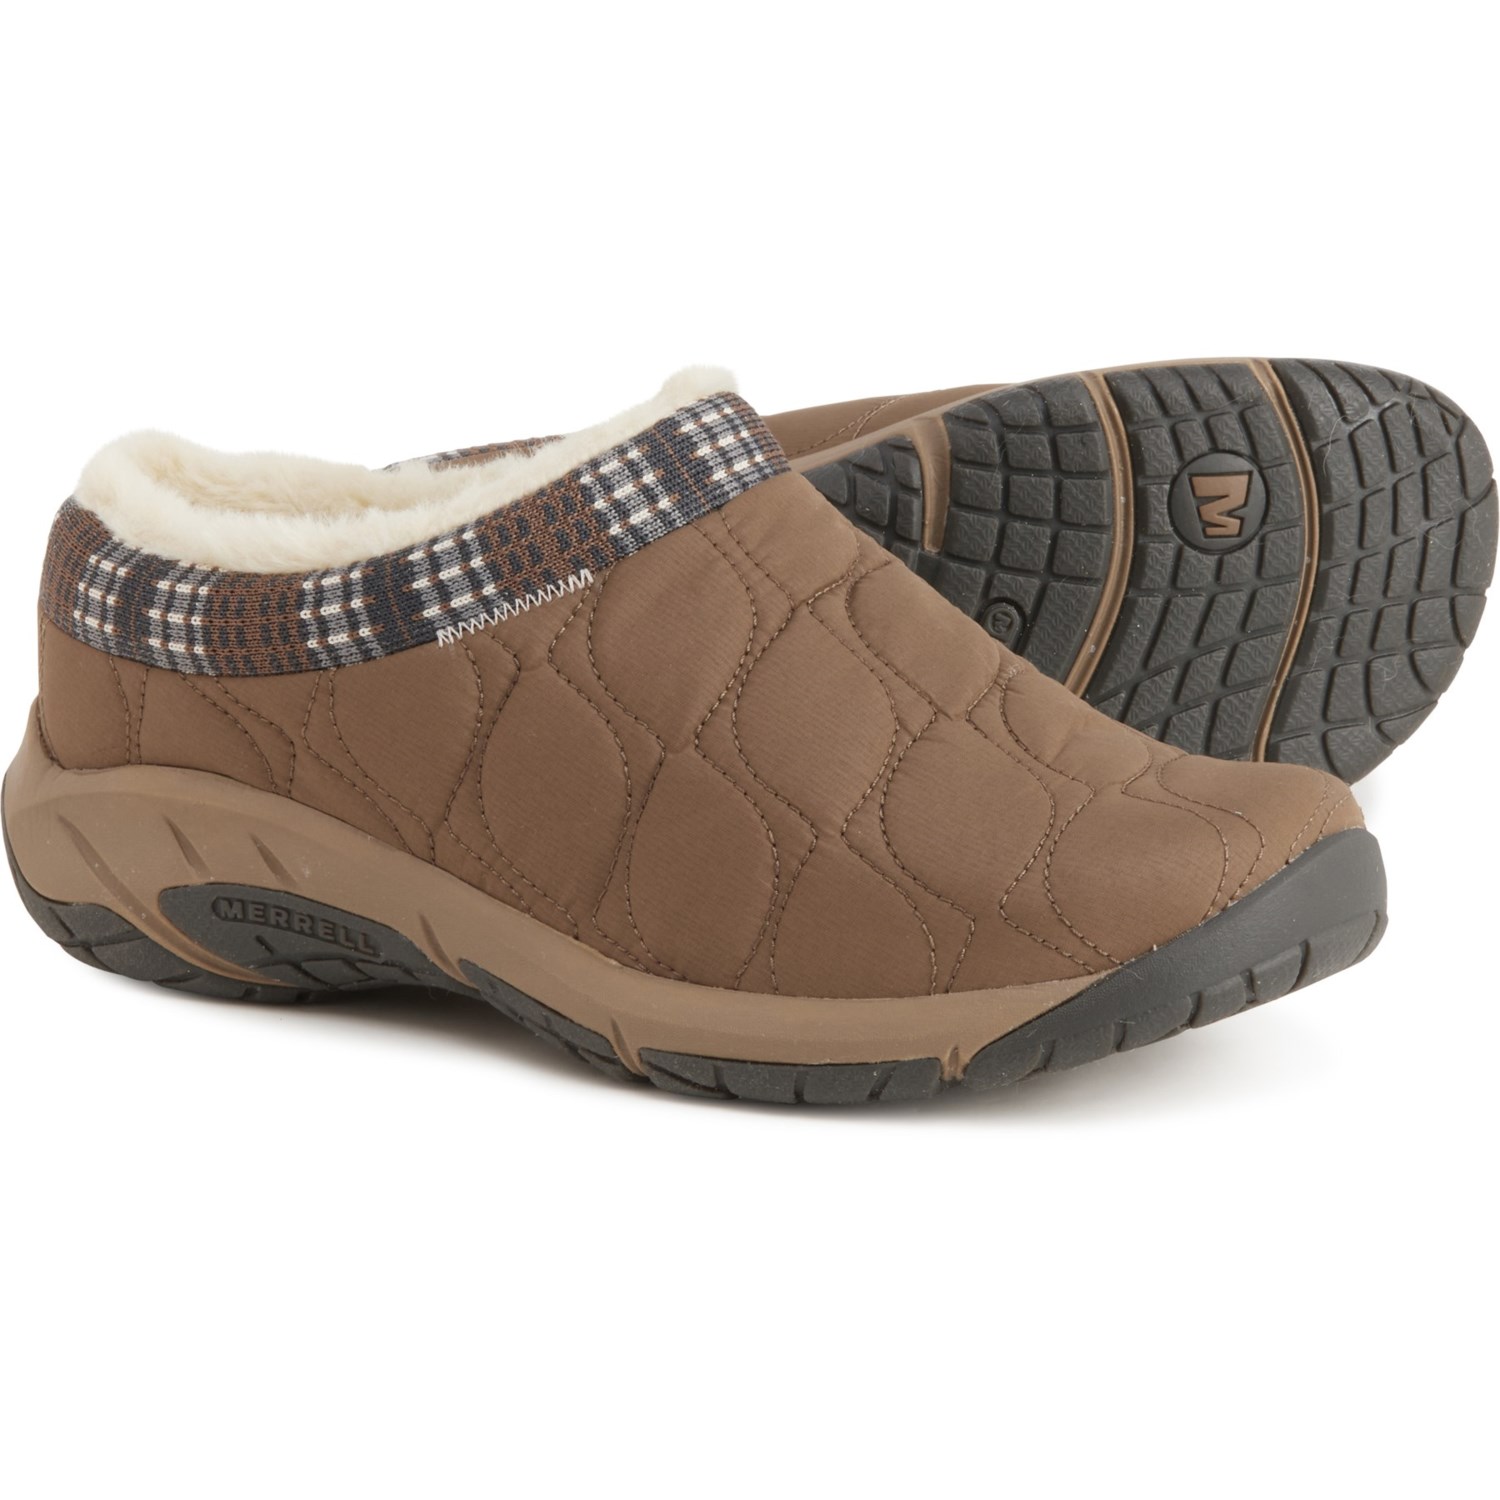 Merrell Encore Ice 4 Puff Shoes (For Women) - Save 60%